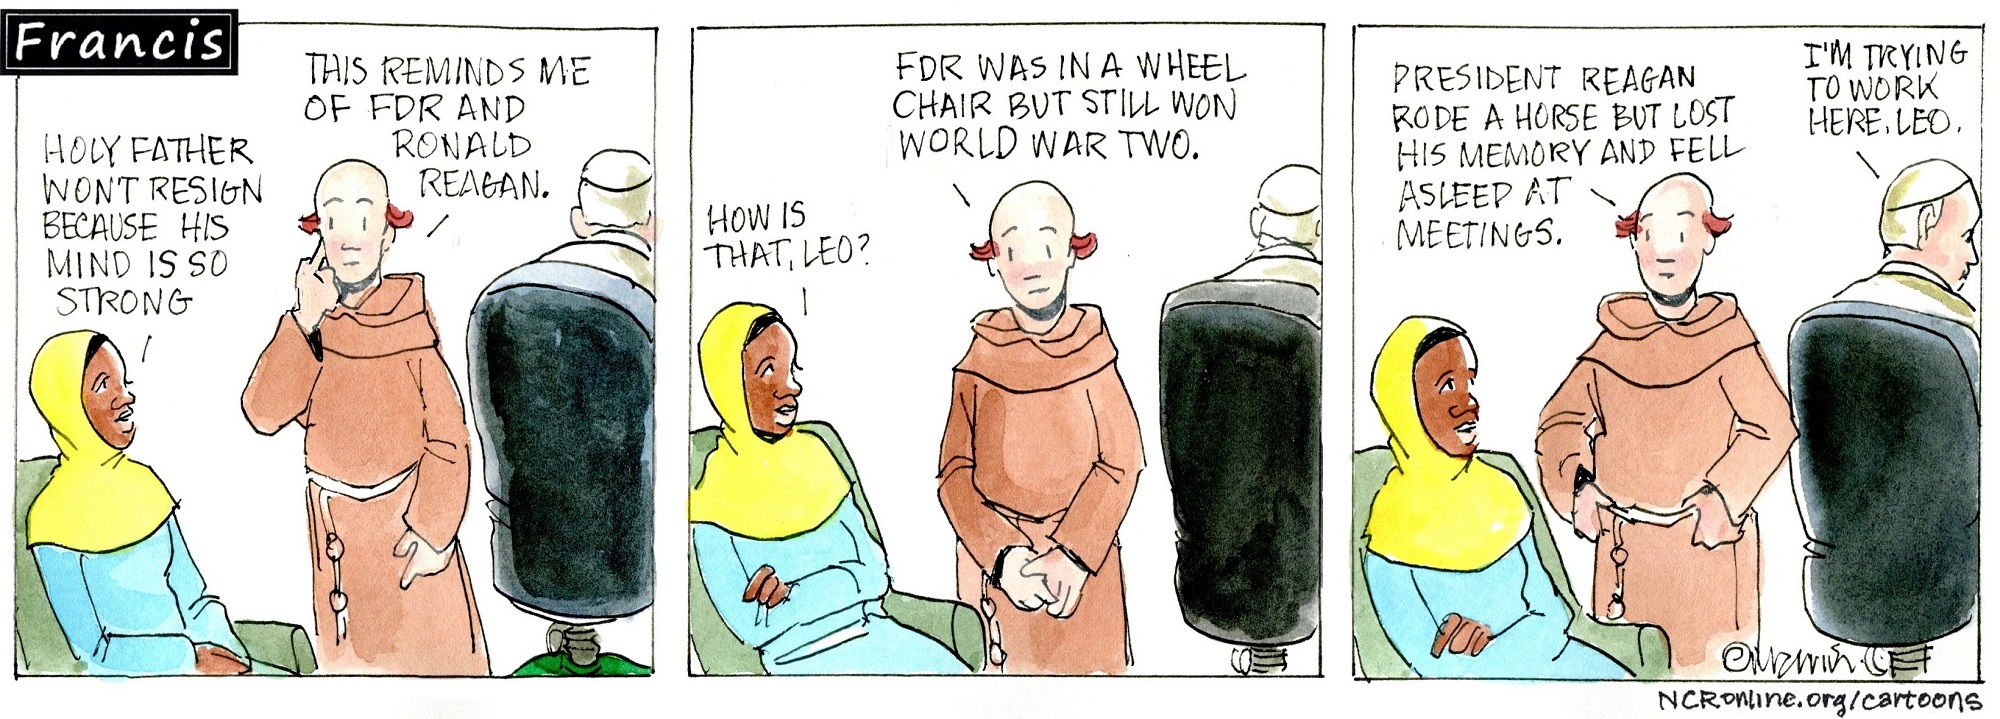 Francis, the comic strip: Francis reminds Leo of FDR and Ronald Reagan. But why?